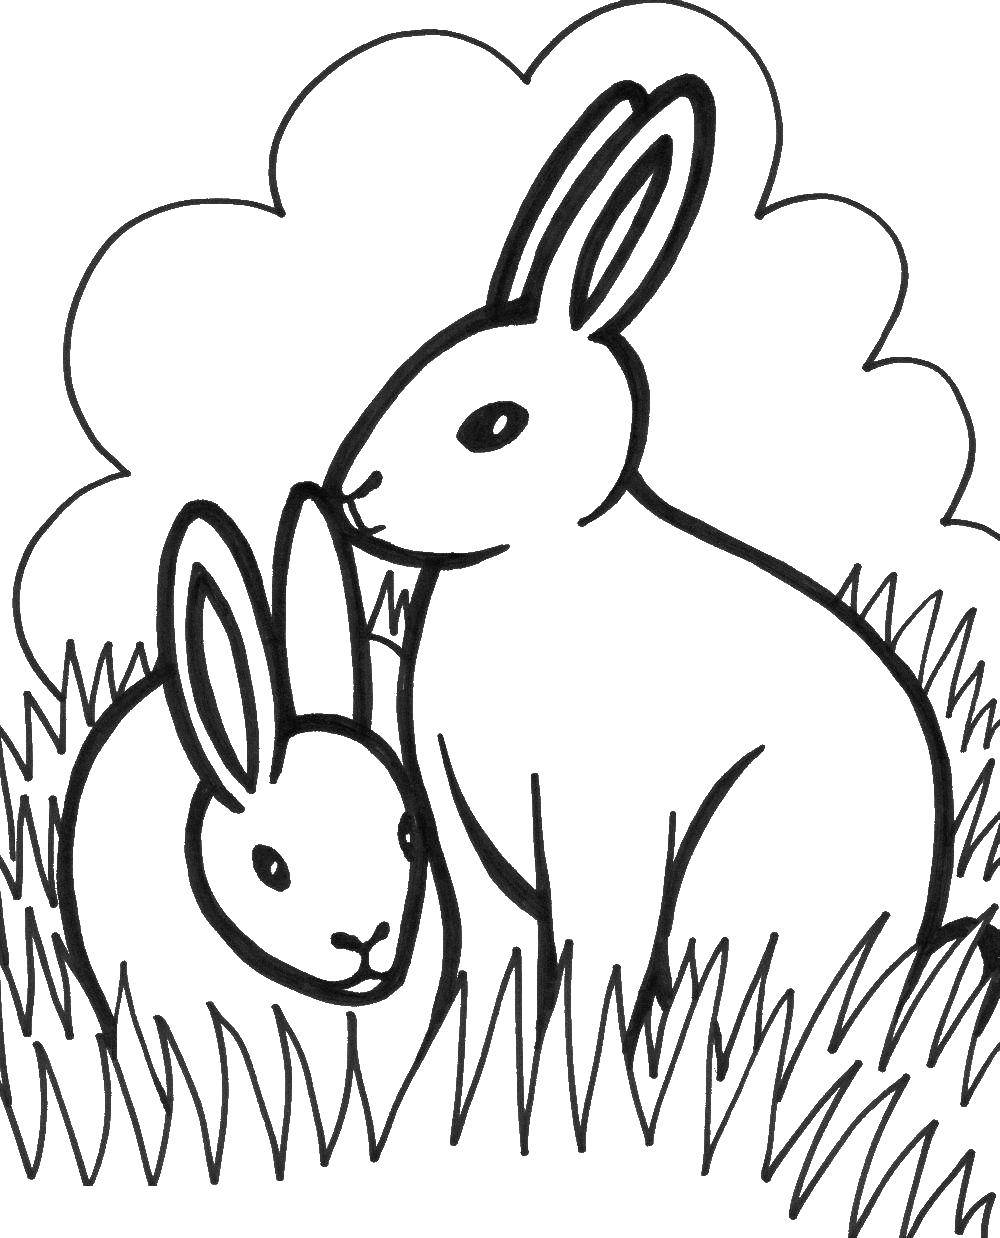 Coloring The rabbits in the grass. Category animals. Tags:  Animals, Bunny.